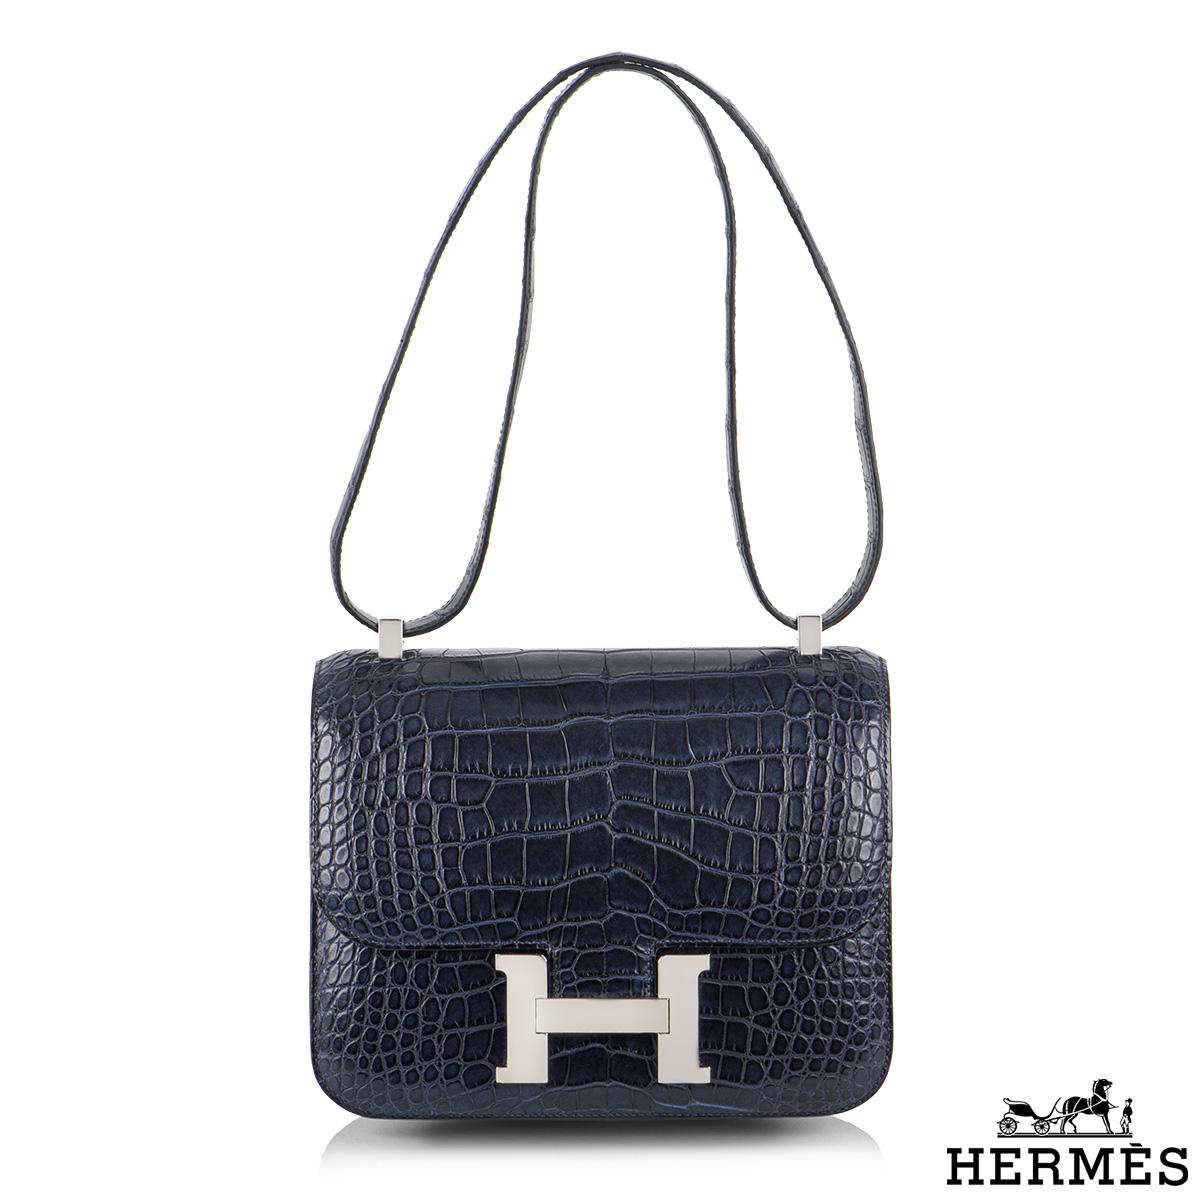 An exquisite Hermès Blue Marine Constance 24 cm of exotic matte Mississippi Alligator leather with palladium hardware. Prized for its durability, this Matte Alligator will get more beautiful with age, developing its coveted satiny shine. The